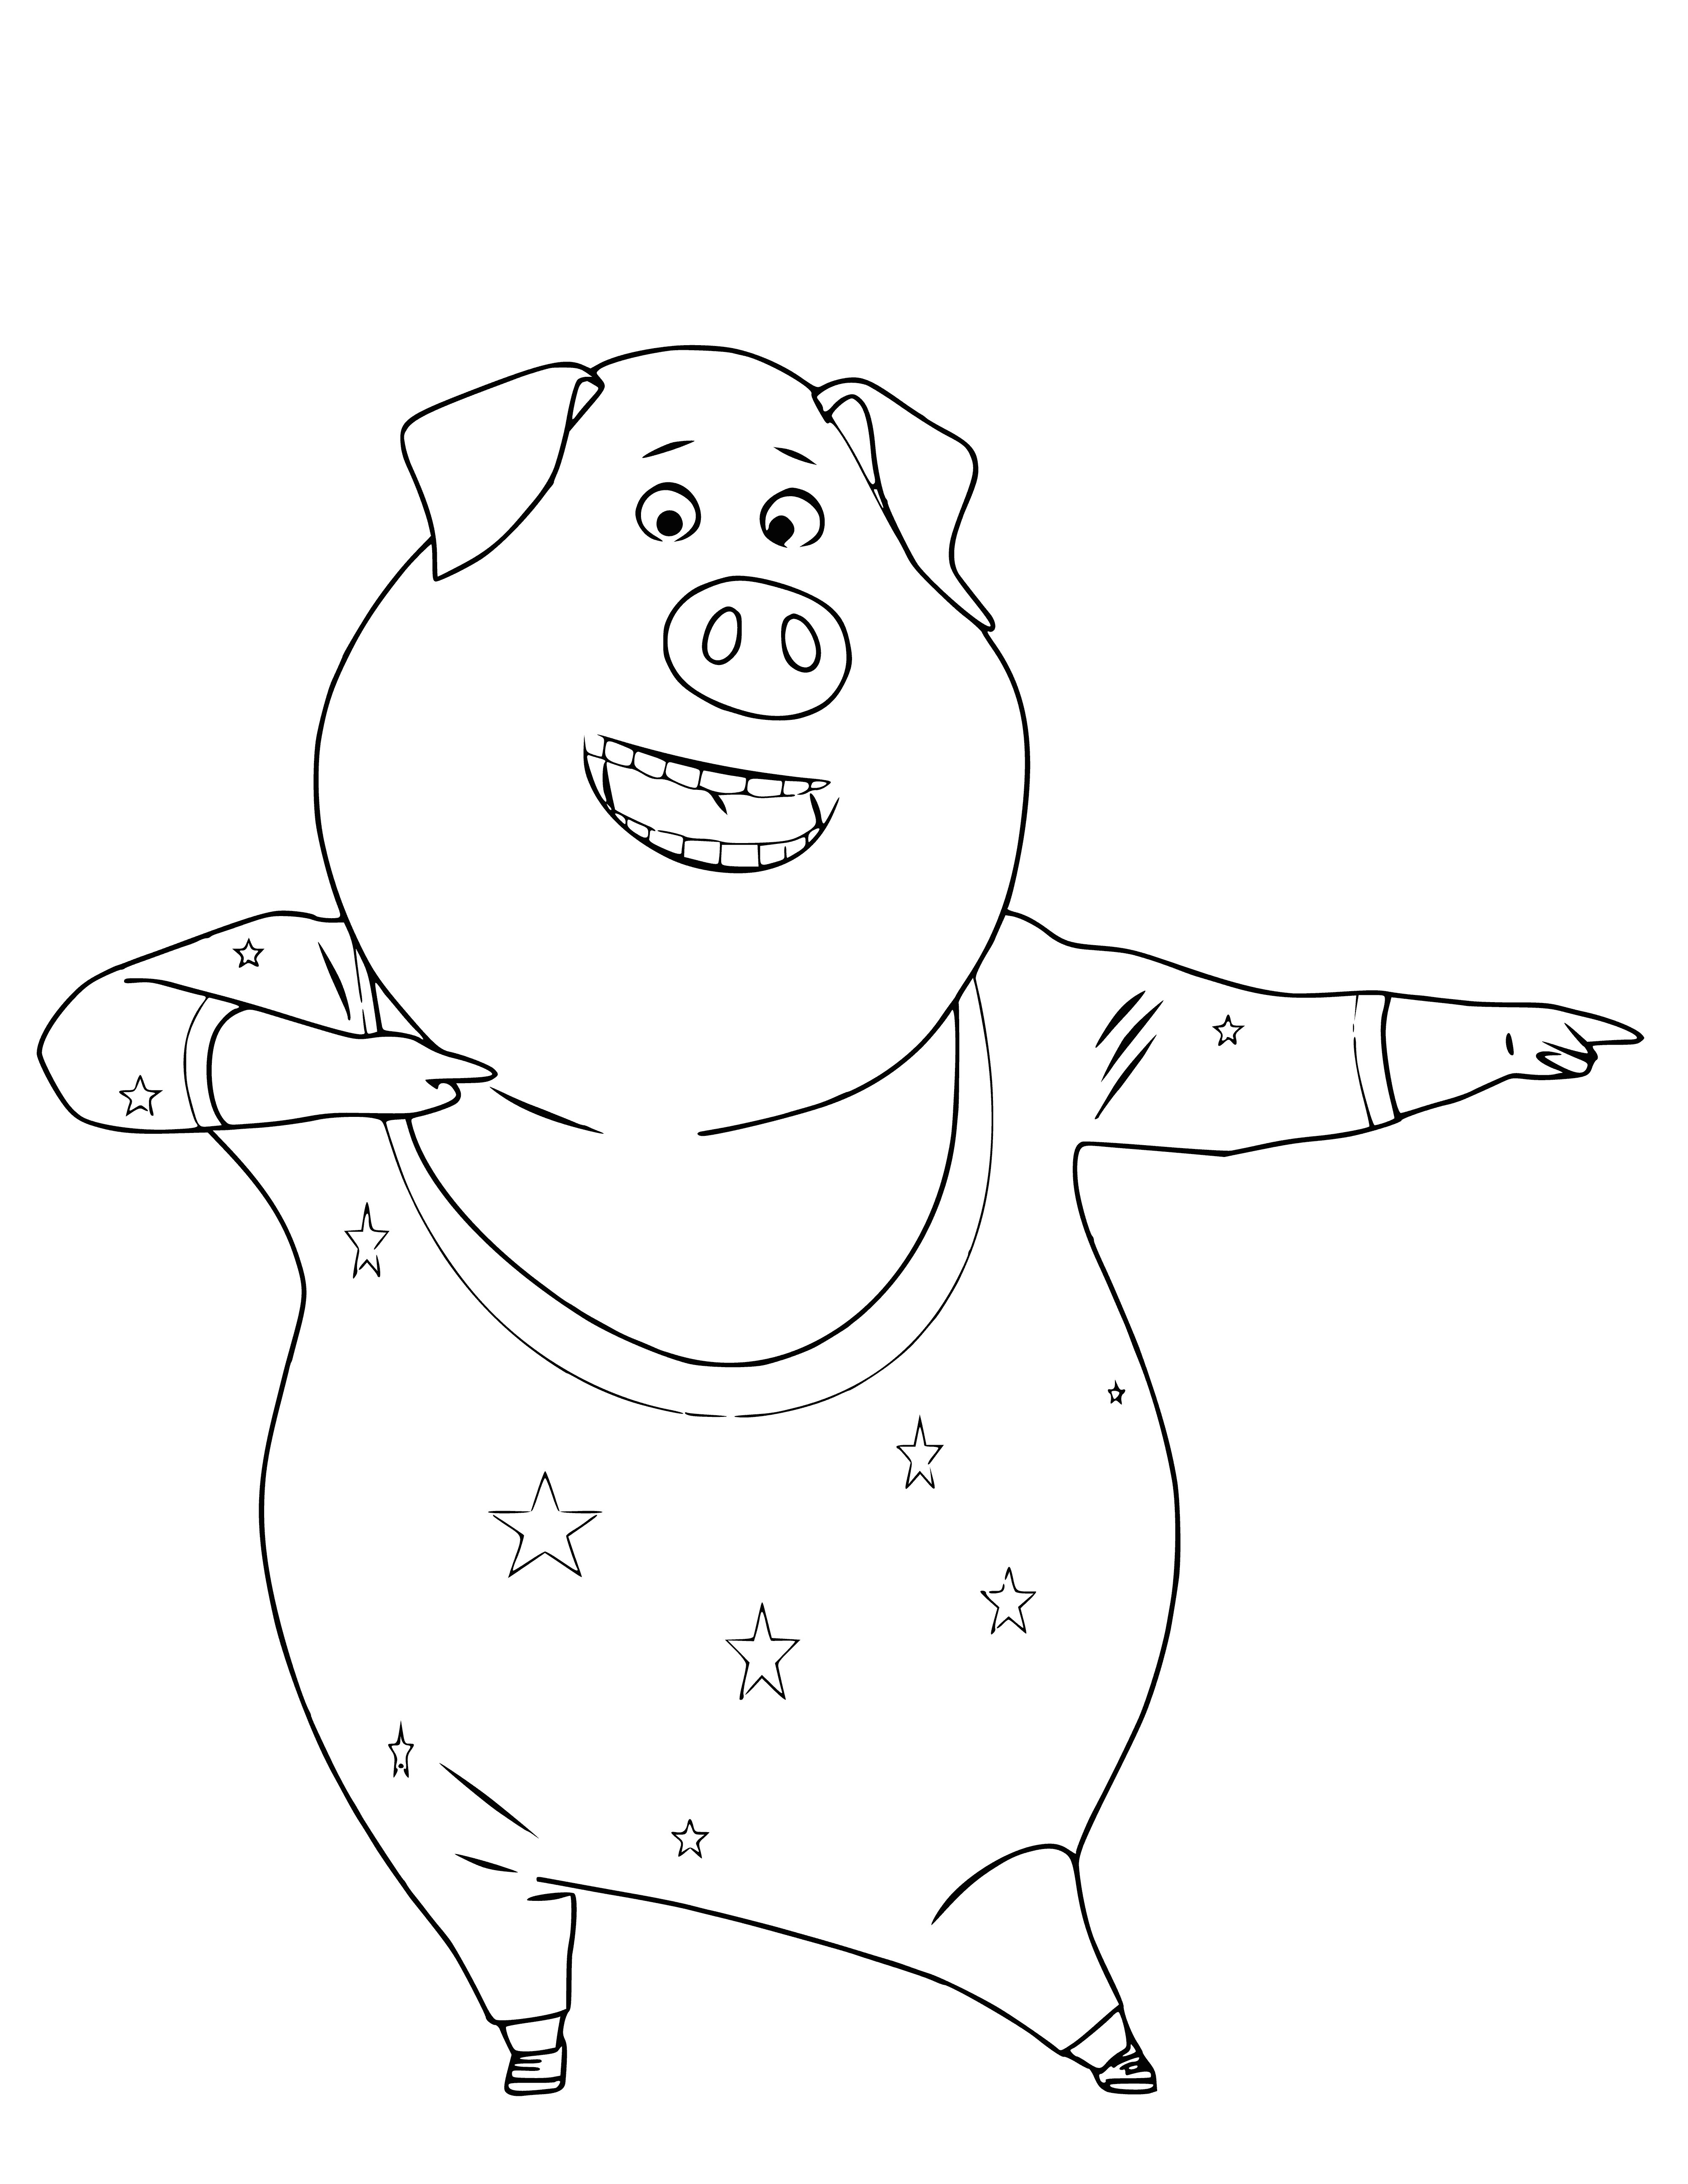 Gunther is dancing coloring page